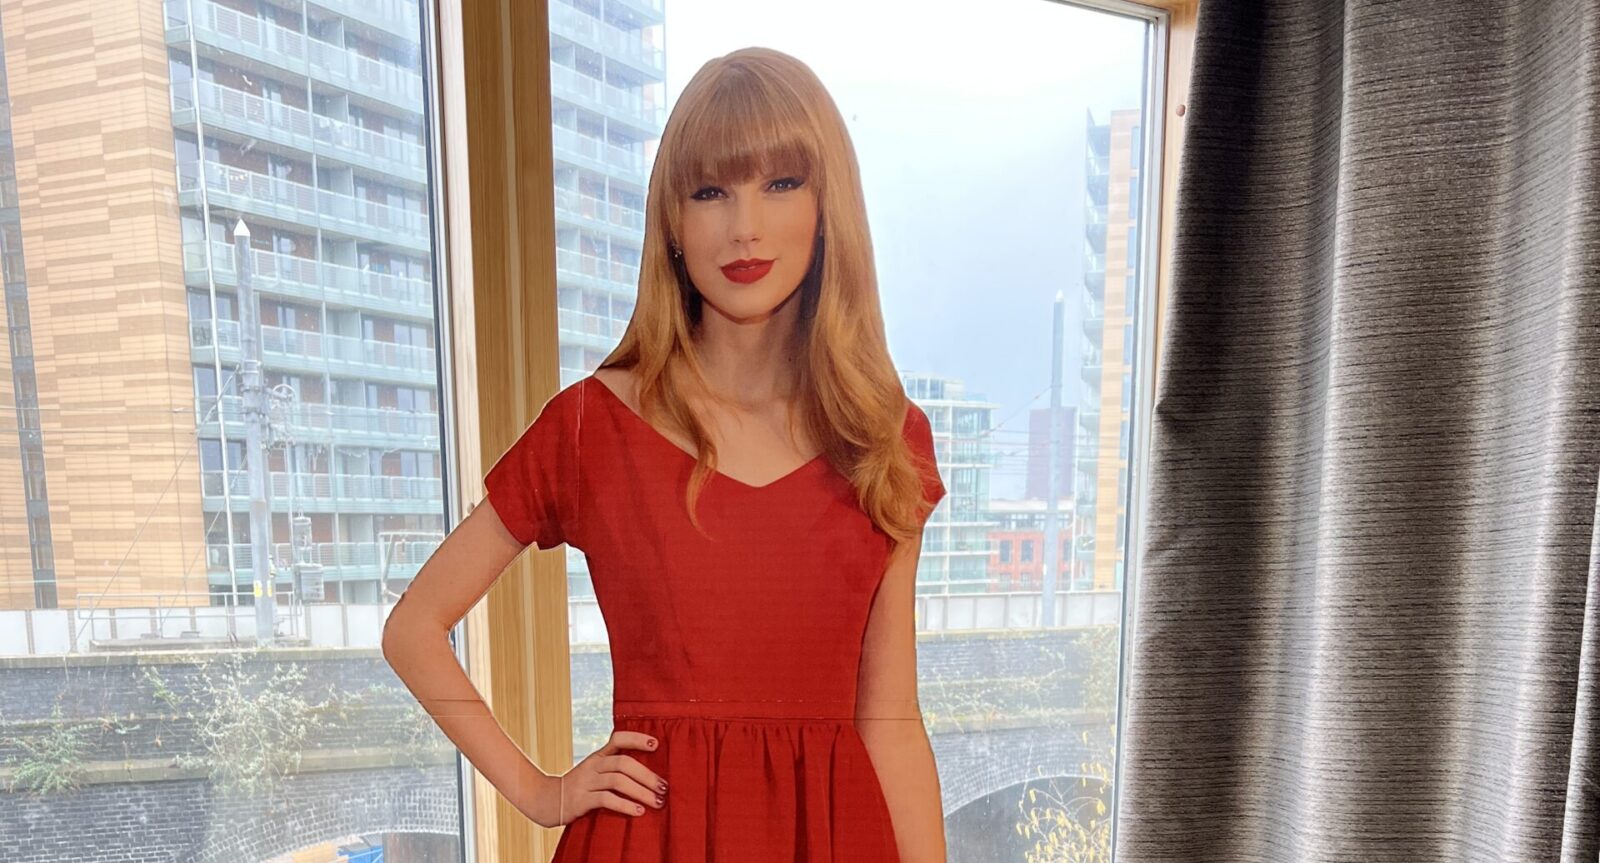 Cardboard cut-out of Taylor Swift loved by commuters to be sold at auction, UK News